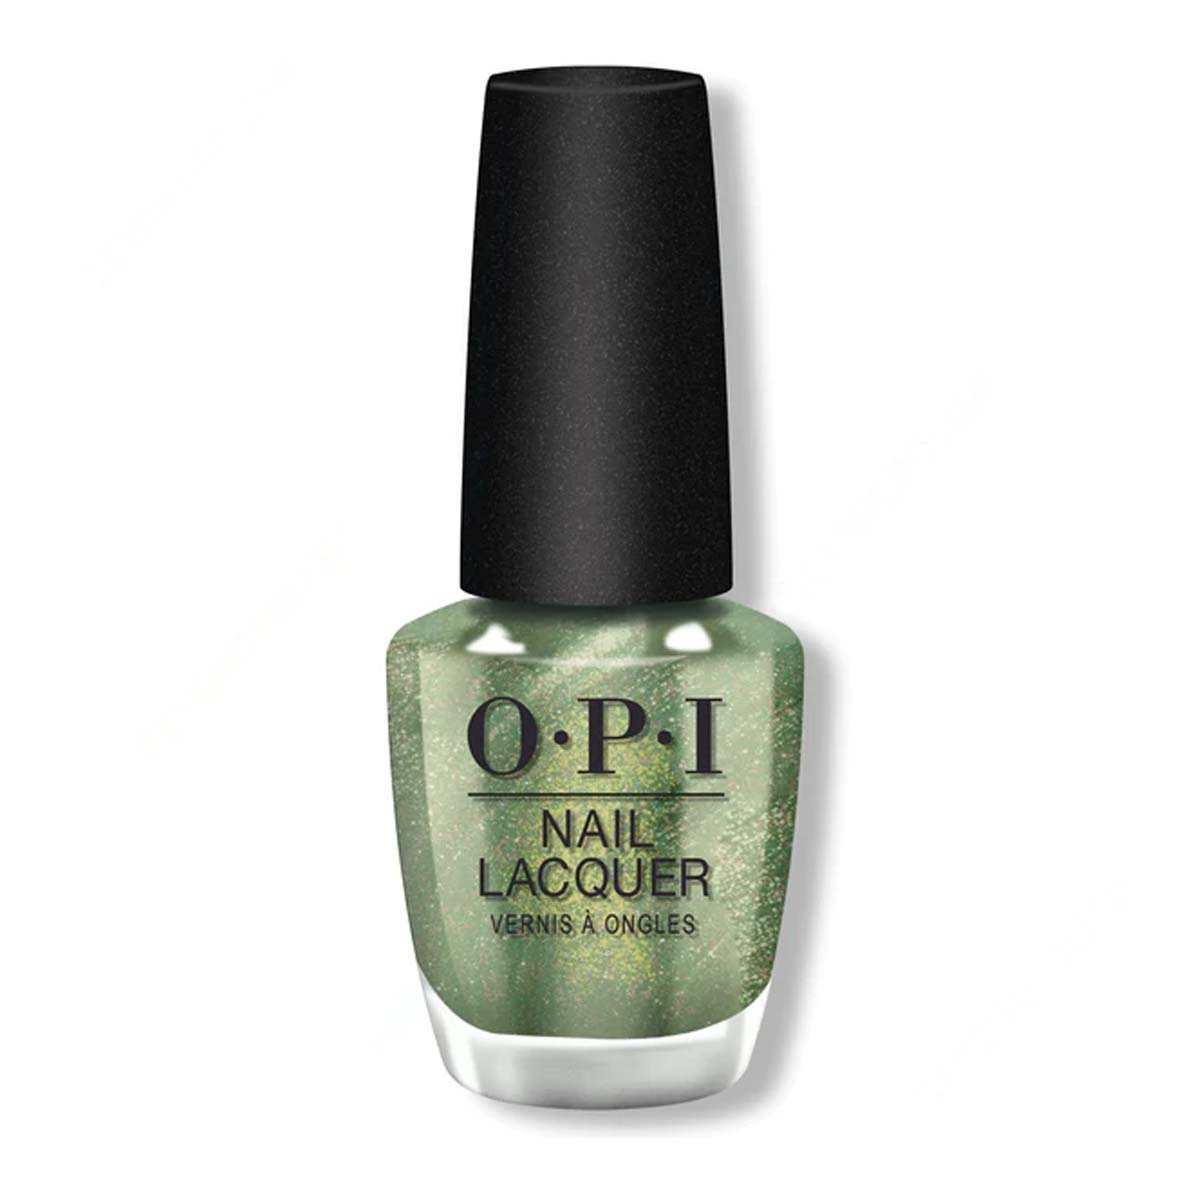 OPI Nail Lacquer polish in the green shade Decked to the Pines